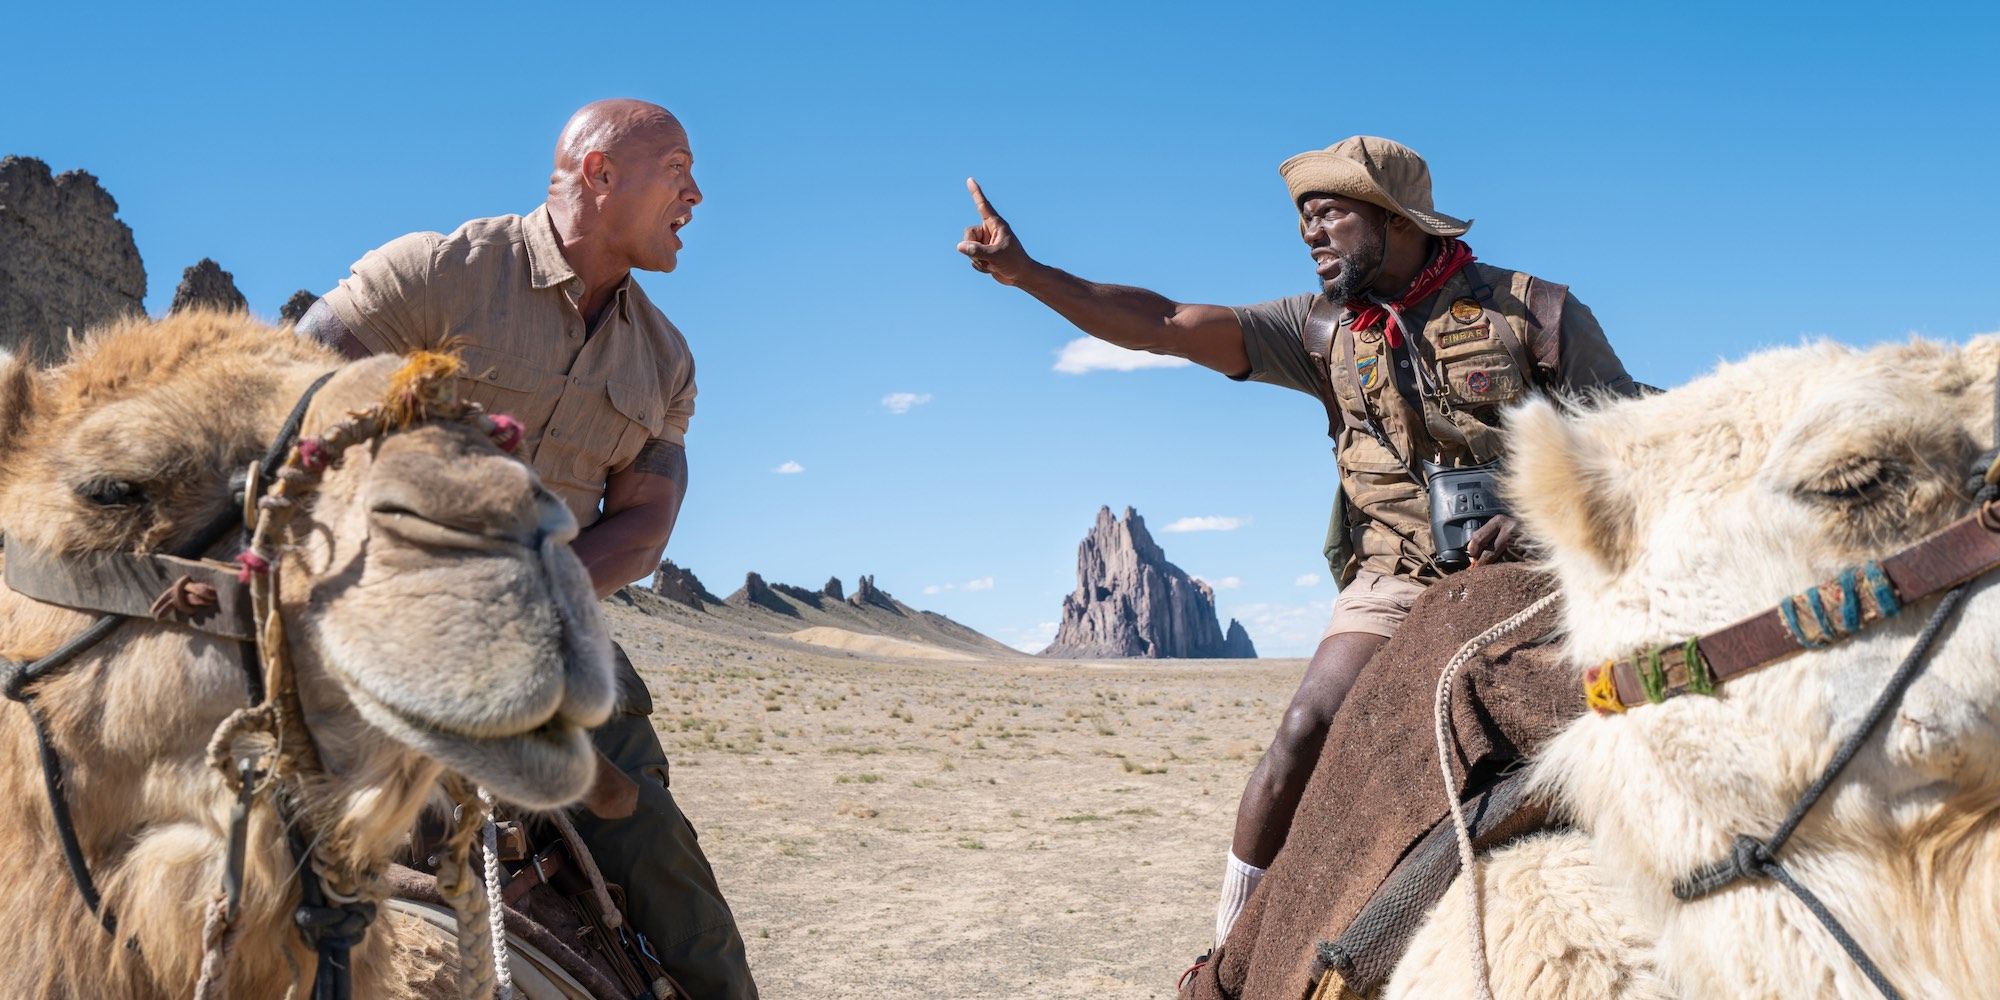 Dwayne Johnson 5 Reasons Fast & Furious Is His Best Franchise (& 5 Why Its Jumanji)